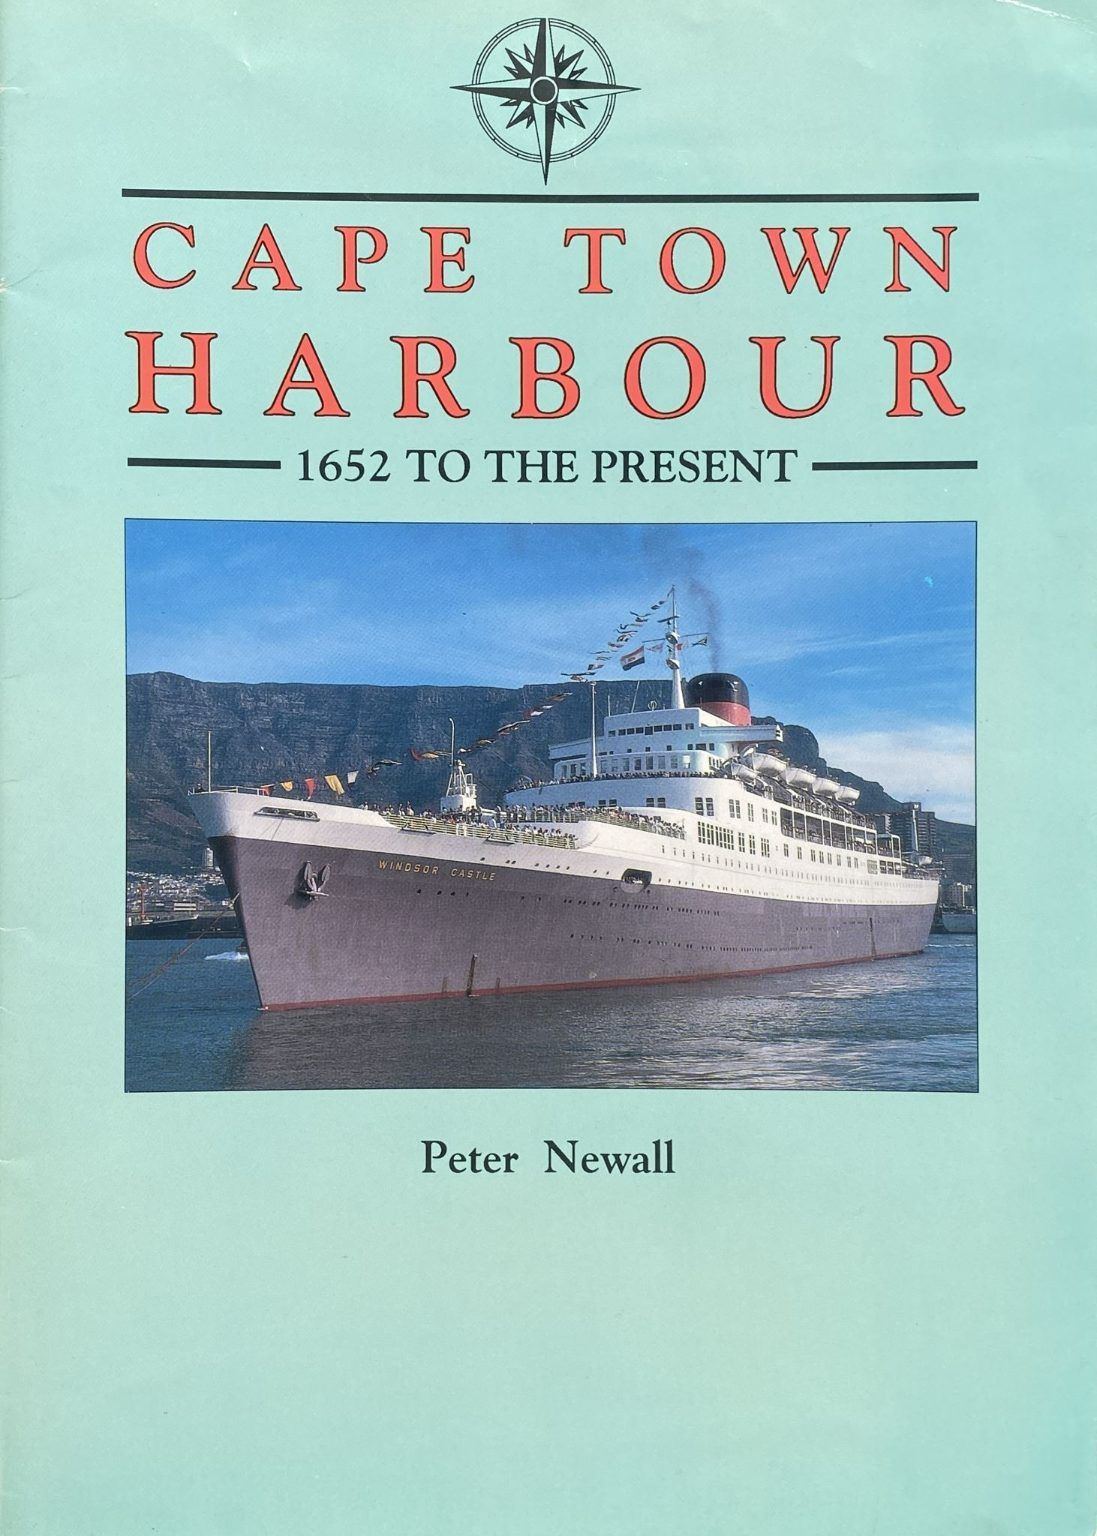 CAPE TOWN HARBOUR: 1652 To The Present